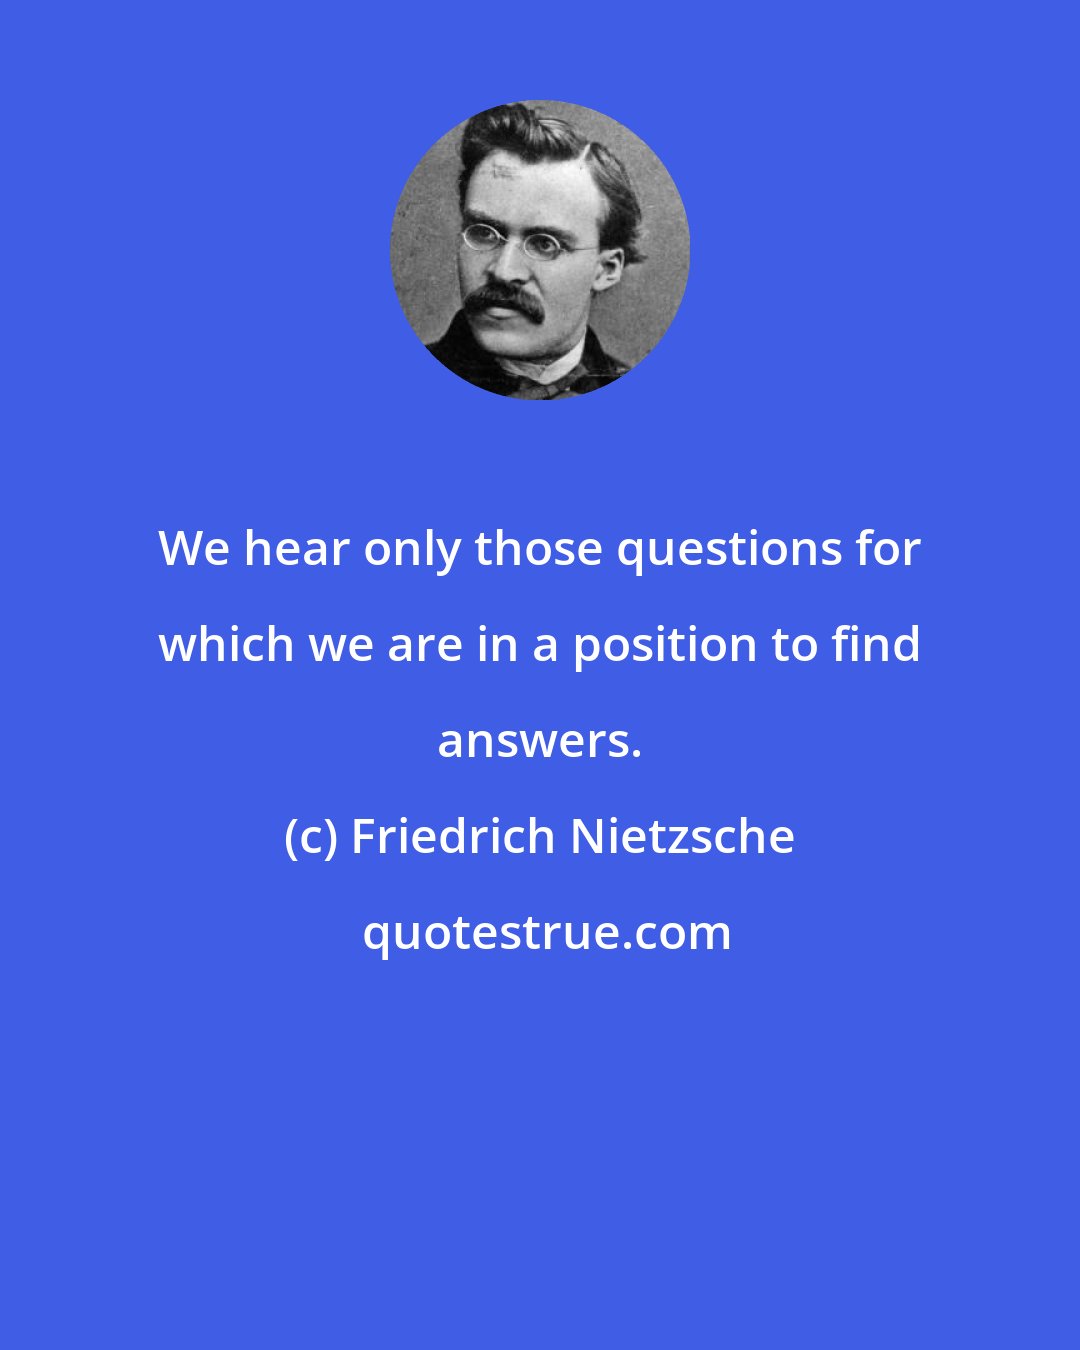 Friedrich Nietzsche: We hear only those questions for which we are in a position to find answers.